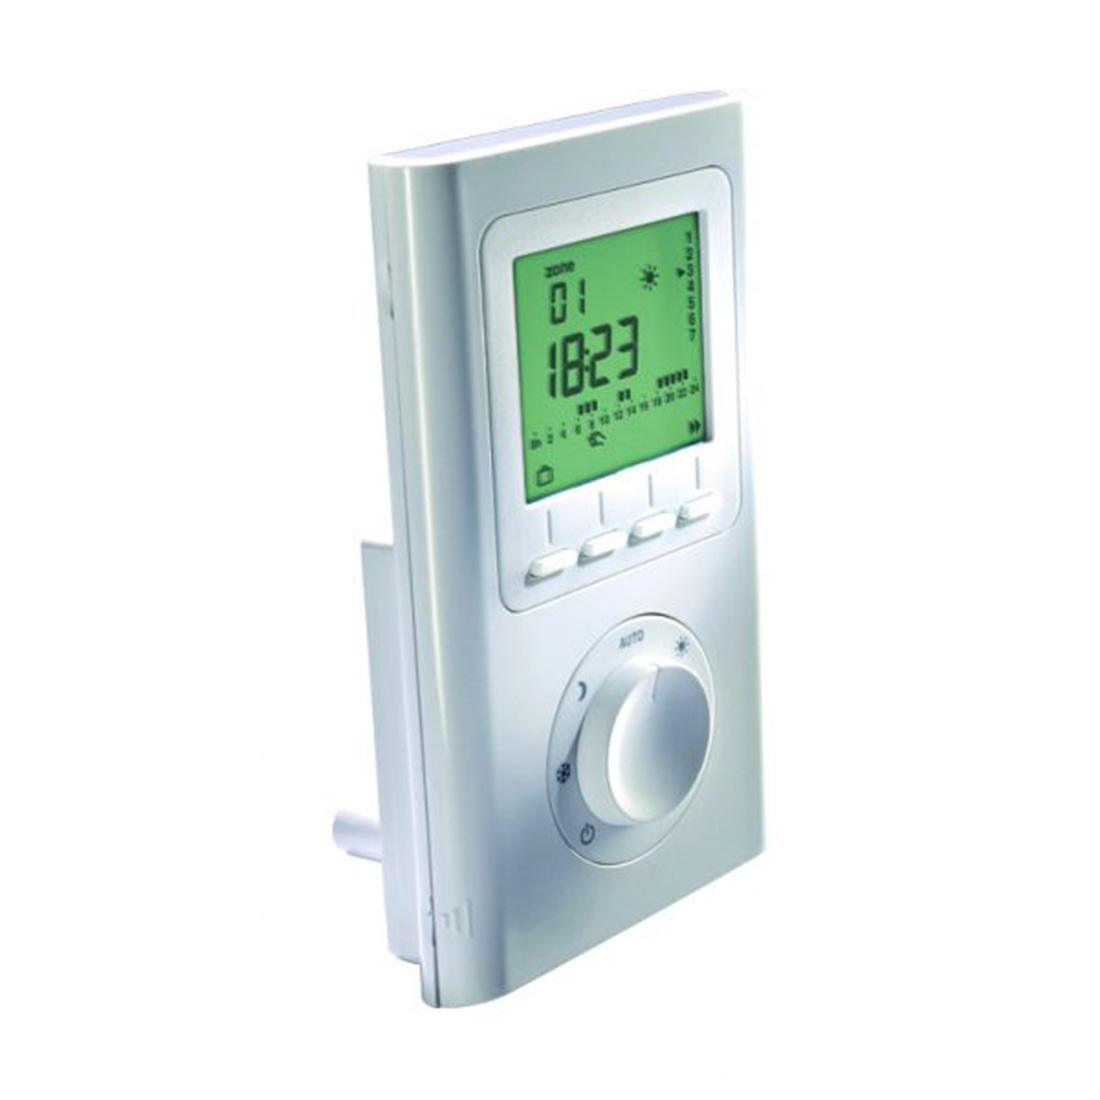 Panasonic Wired LCD thermostat with timer 